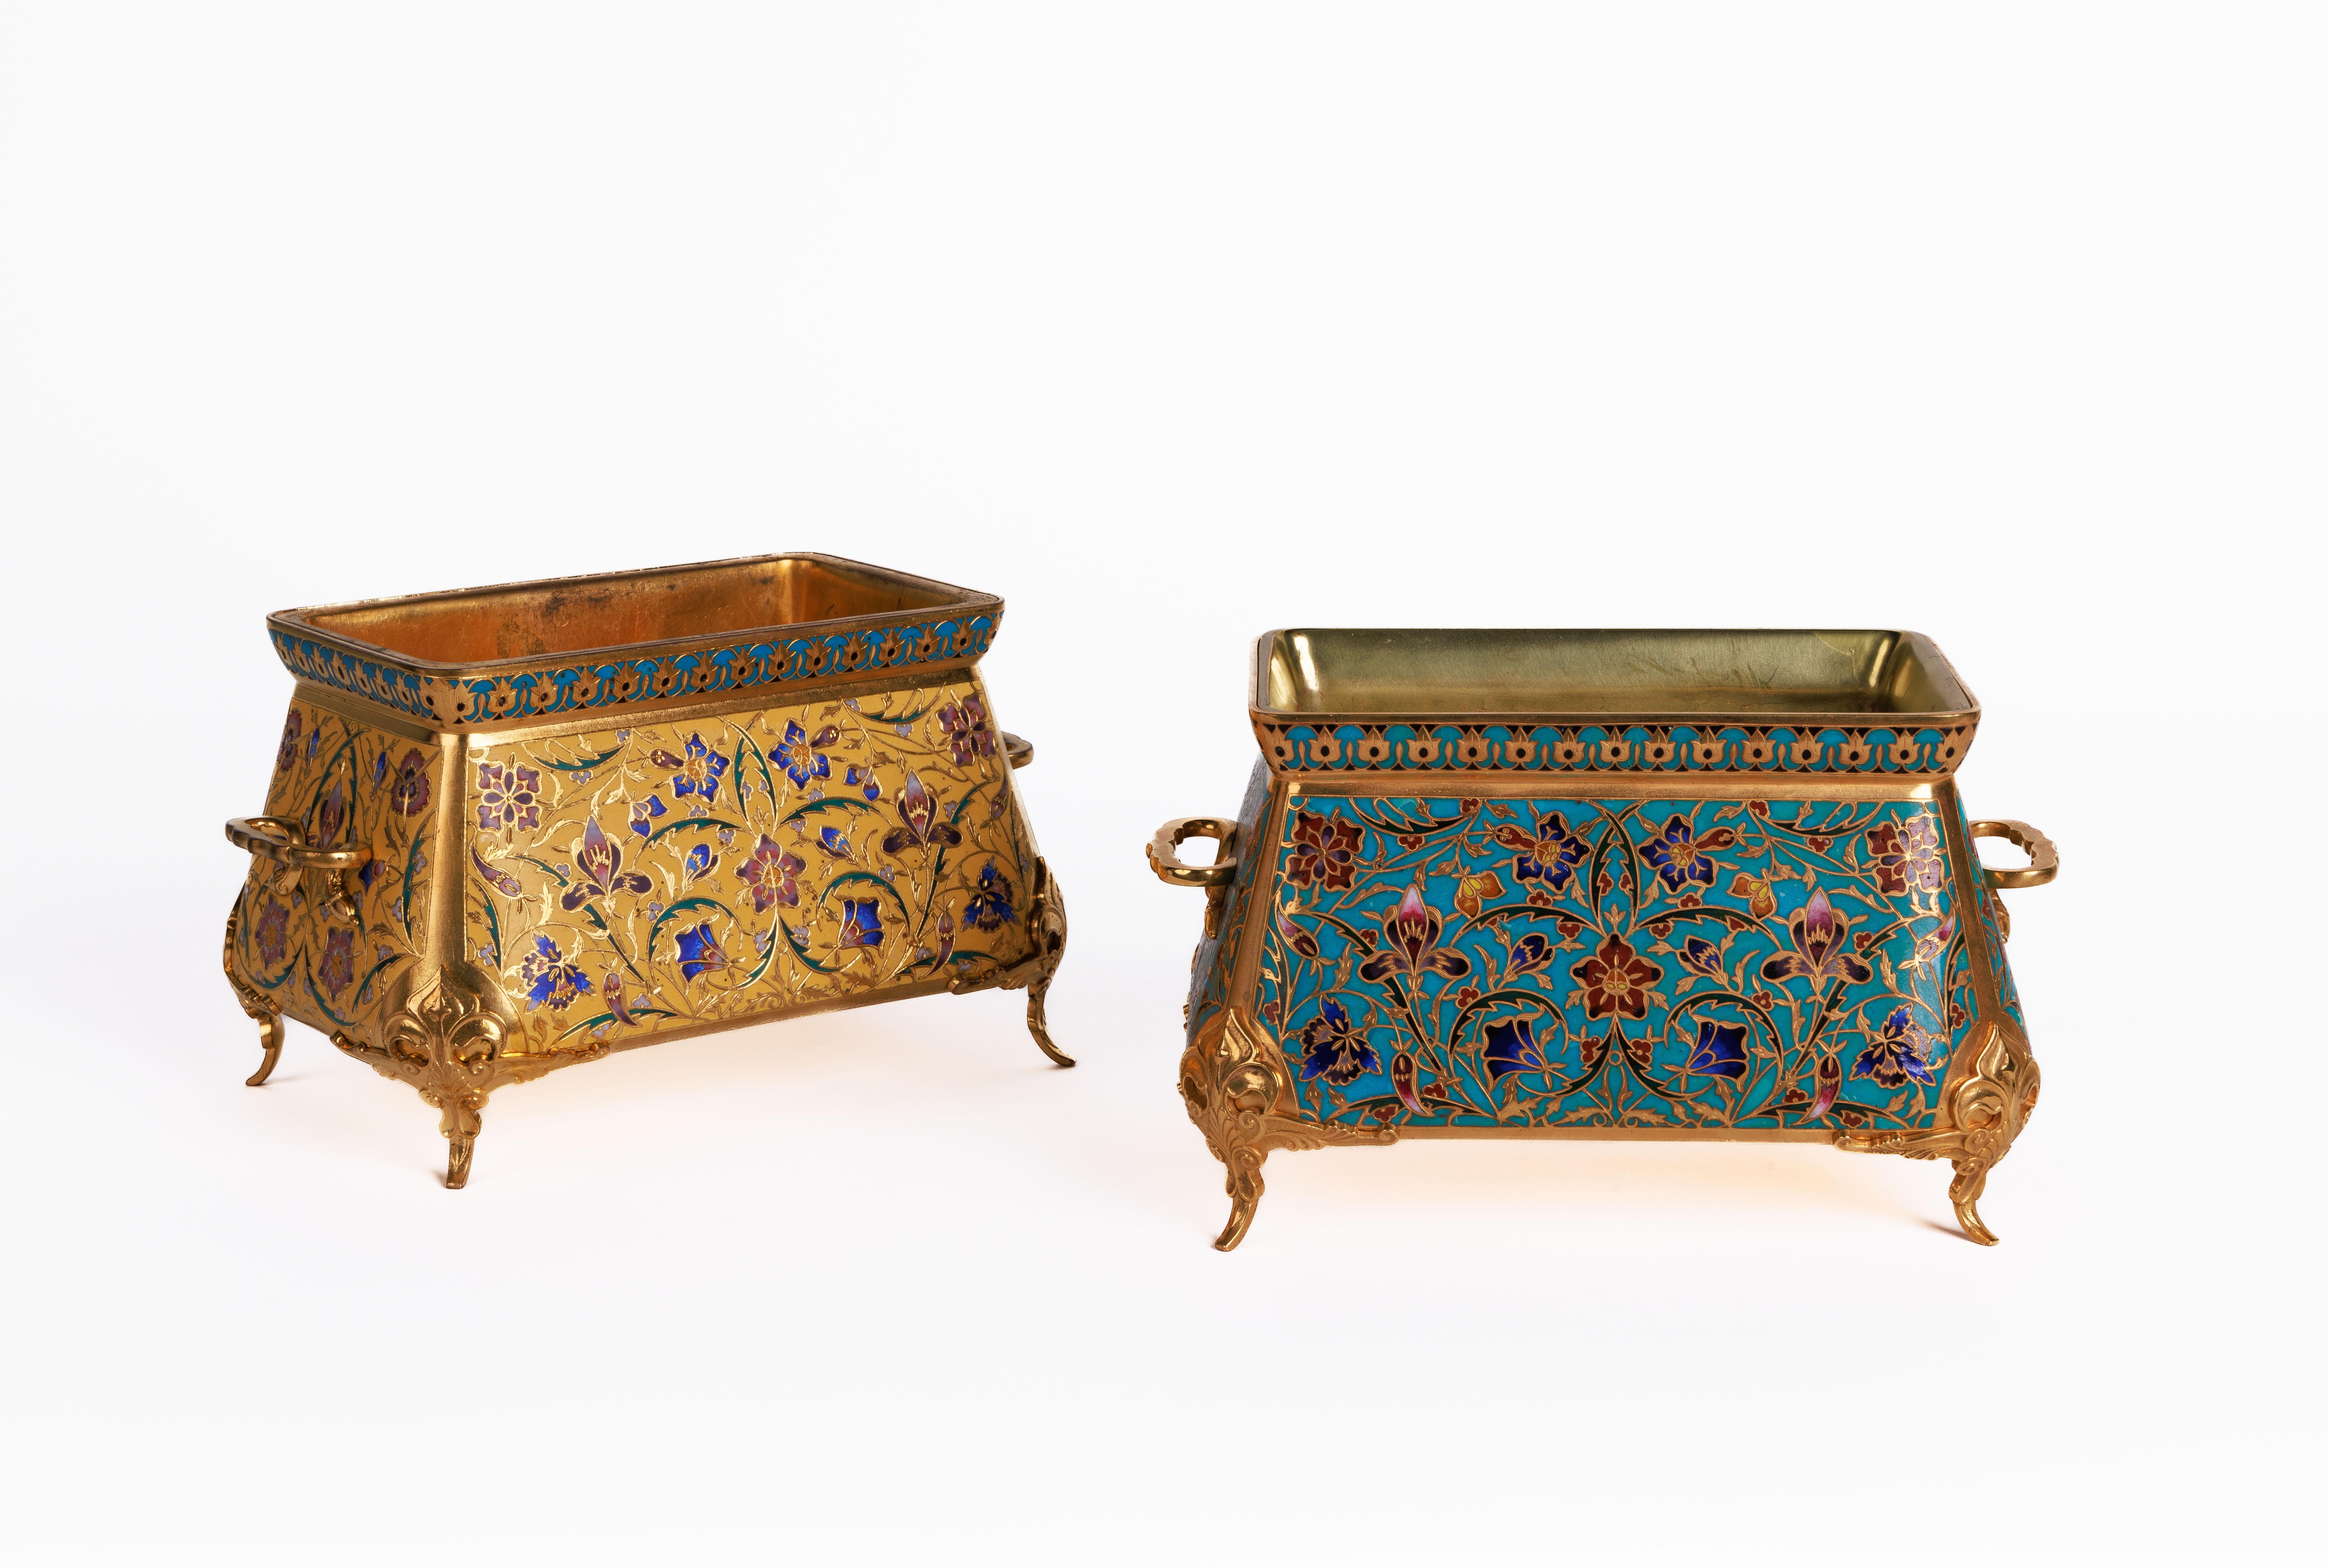 Ferdinand Barbedienne, A French Ormolu and Champleve Enamel Jardiniere, C. 1870 For Sale 4